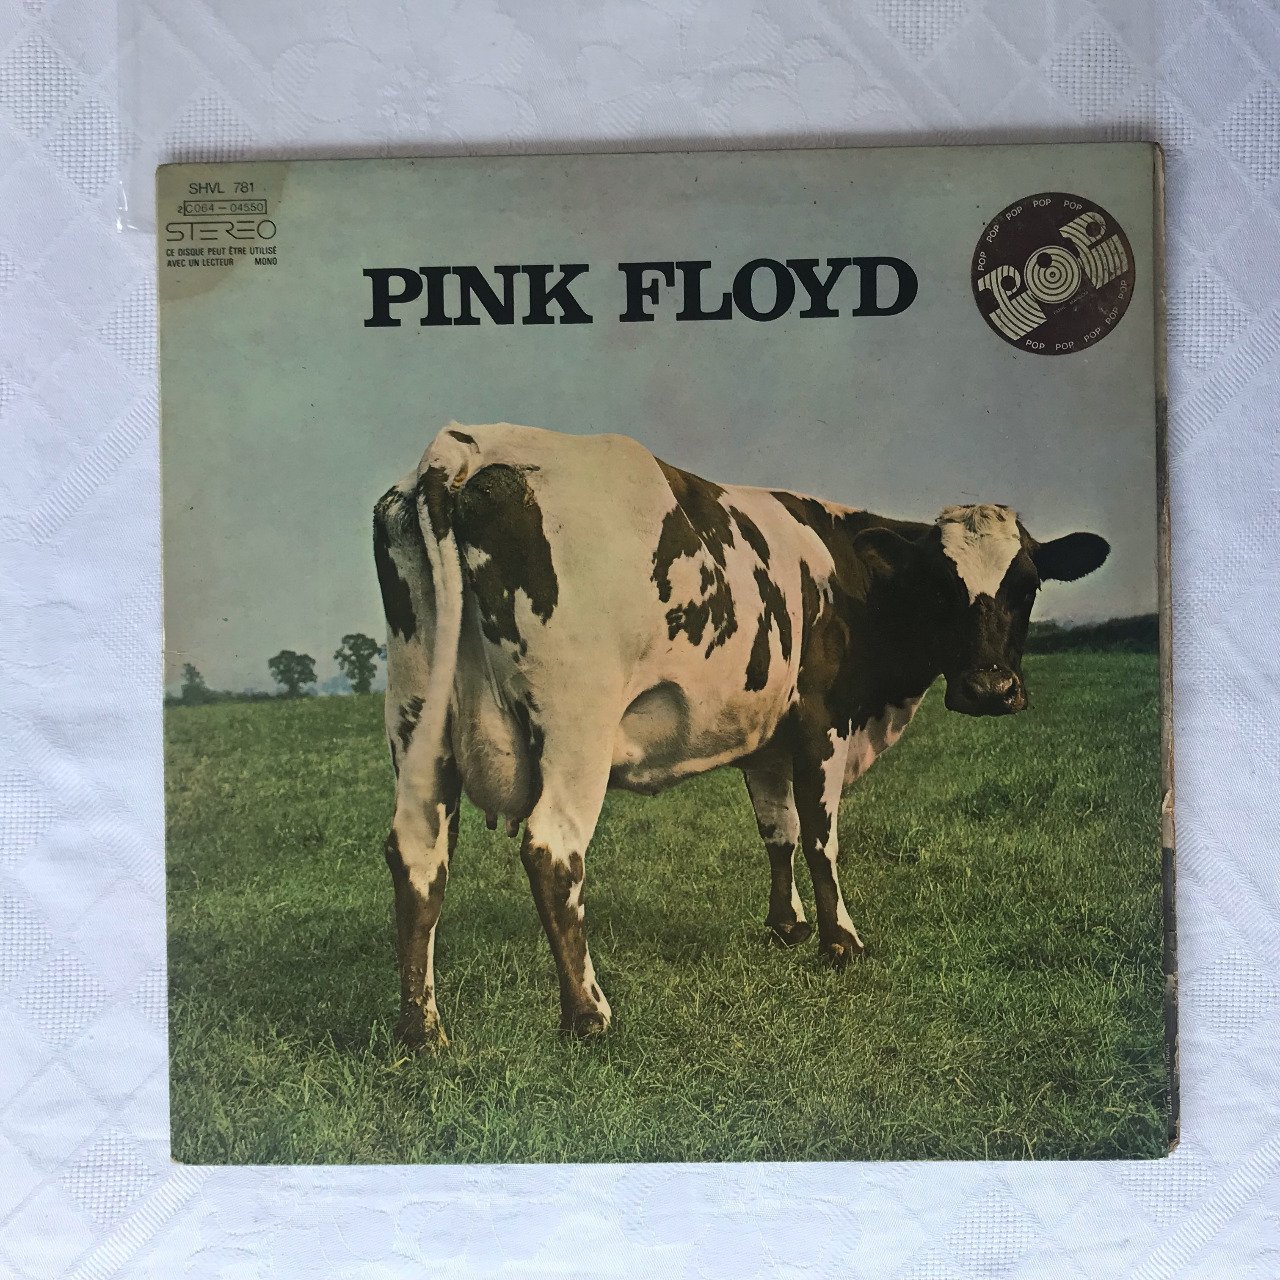 Disque vinyle  Pink Floyd ‎– Atom Heart Mother, Réf 2C 064 - 04550,  1970